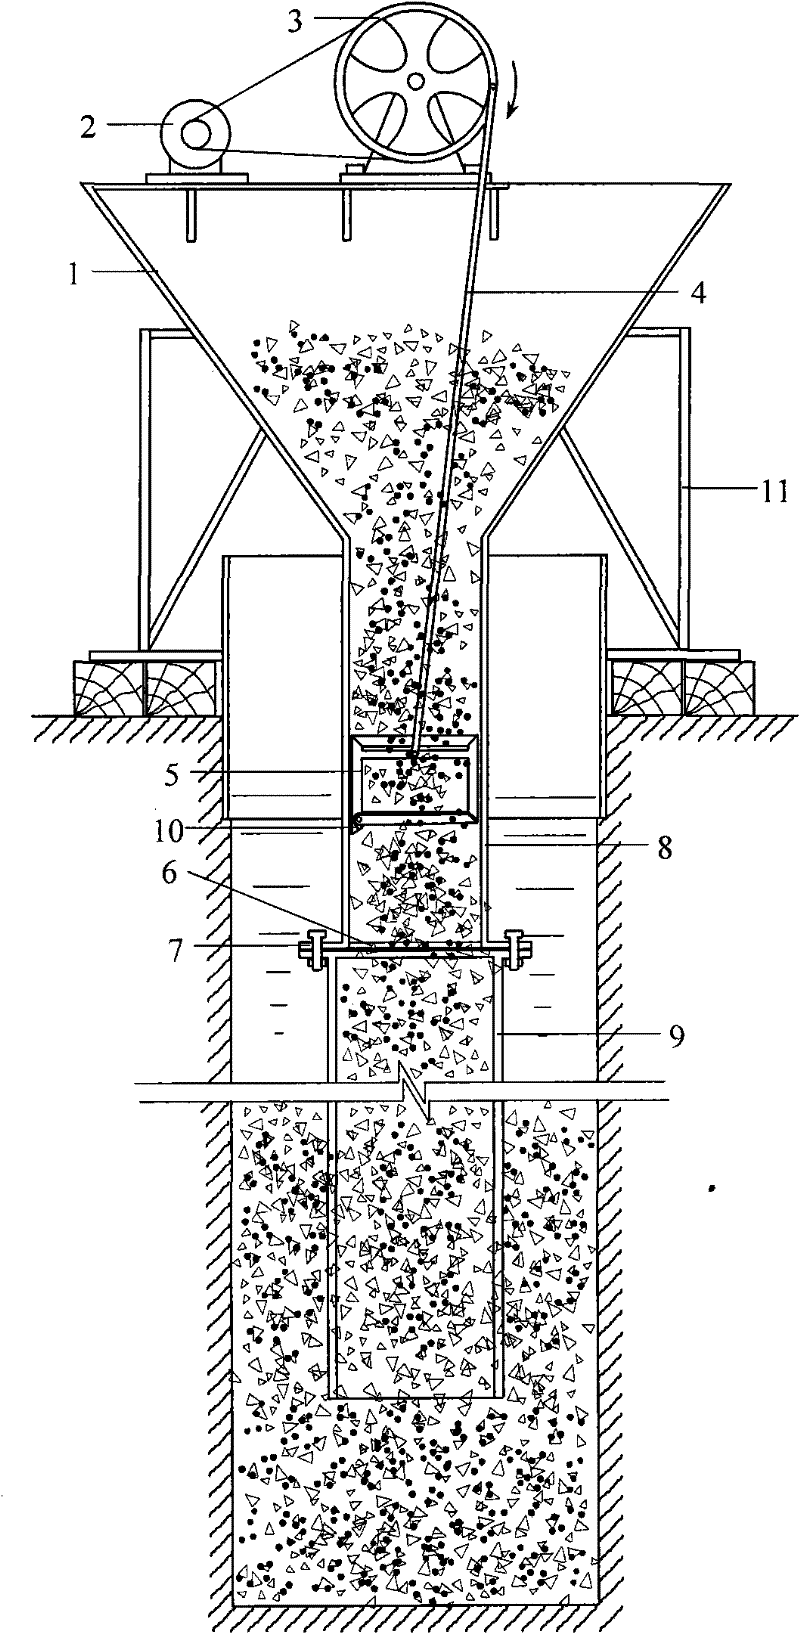 Compulsory pouring device and construction method of bored pile underwater concrete